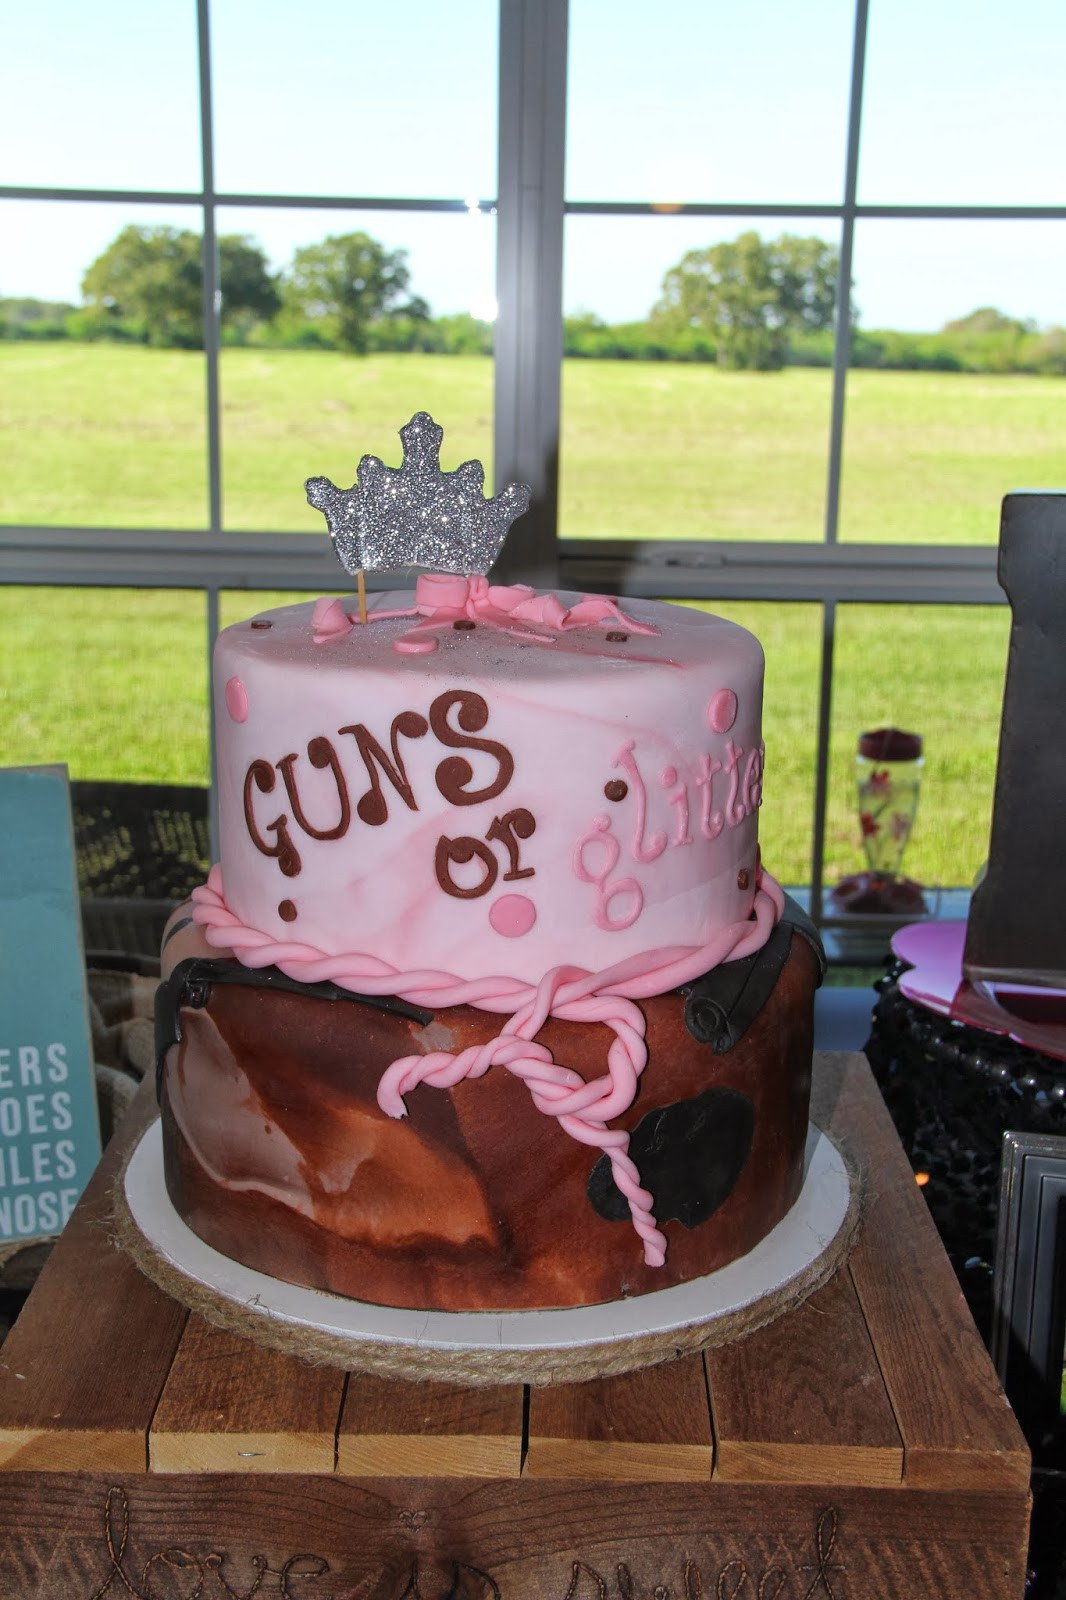 Guns And Glitter Gender Reveal Party Ideas
 Life as Lips bs Guns or Glitter Gender Reveal 11 10 13